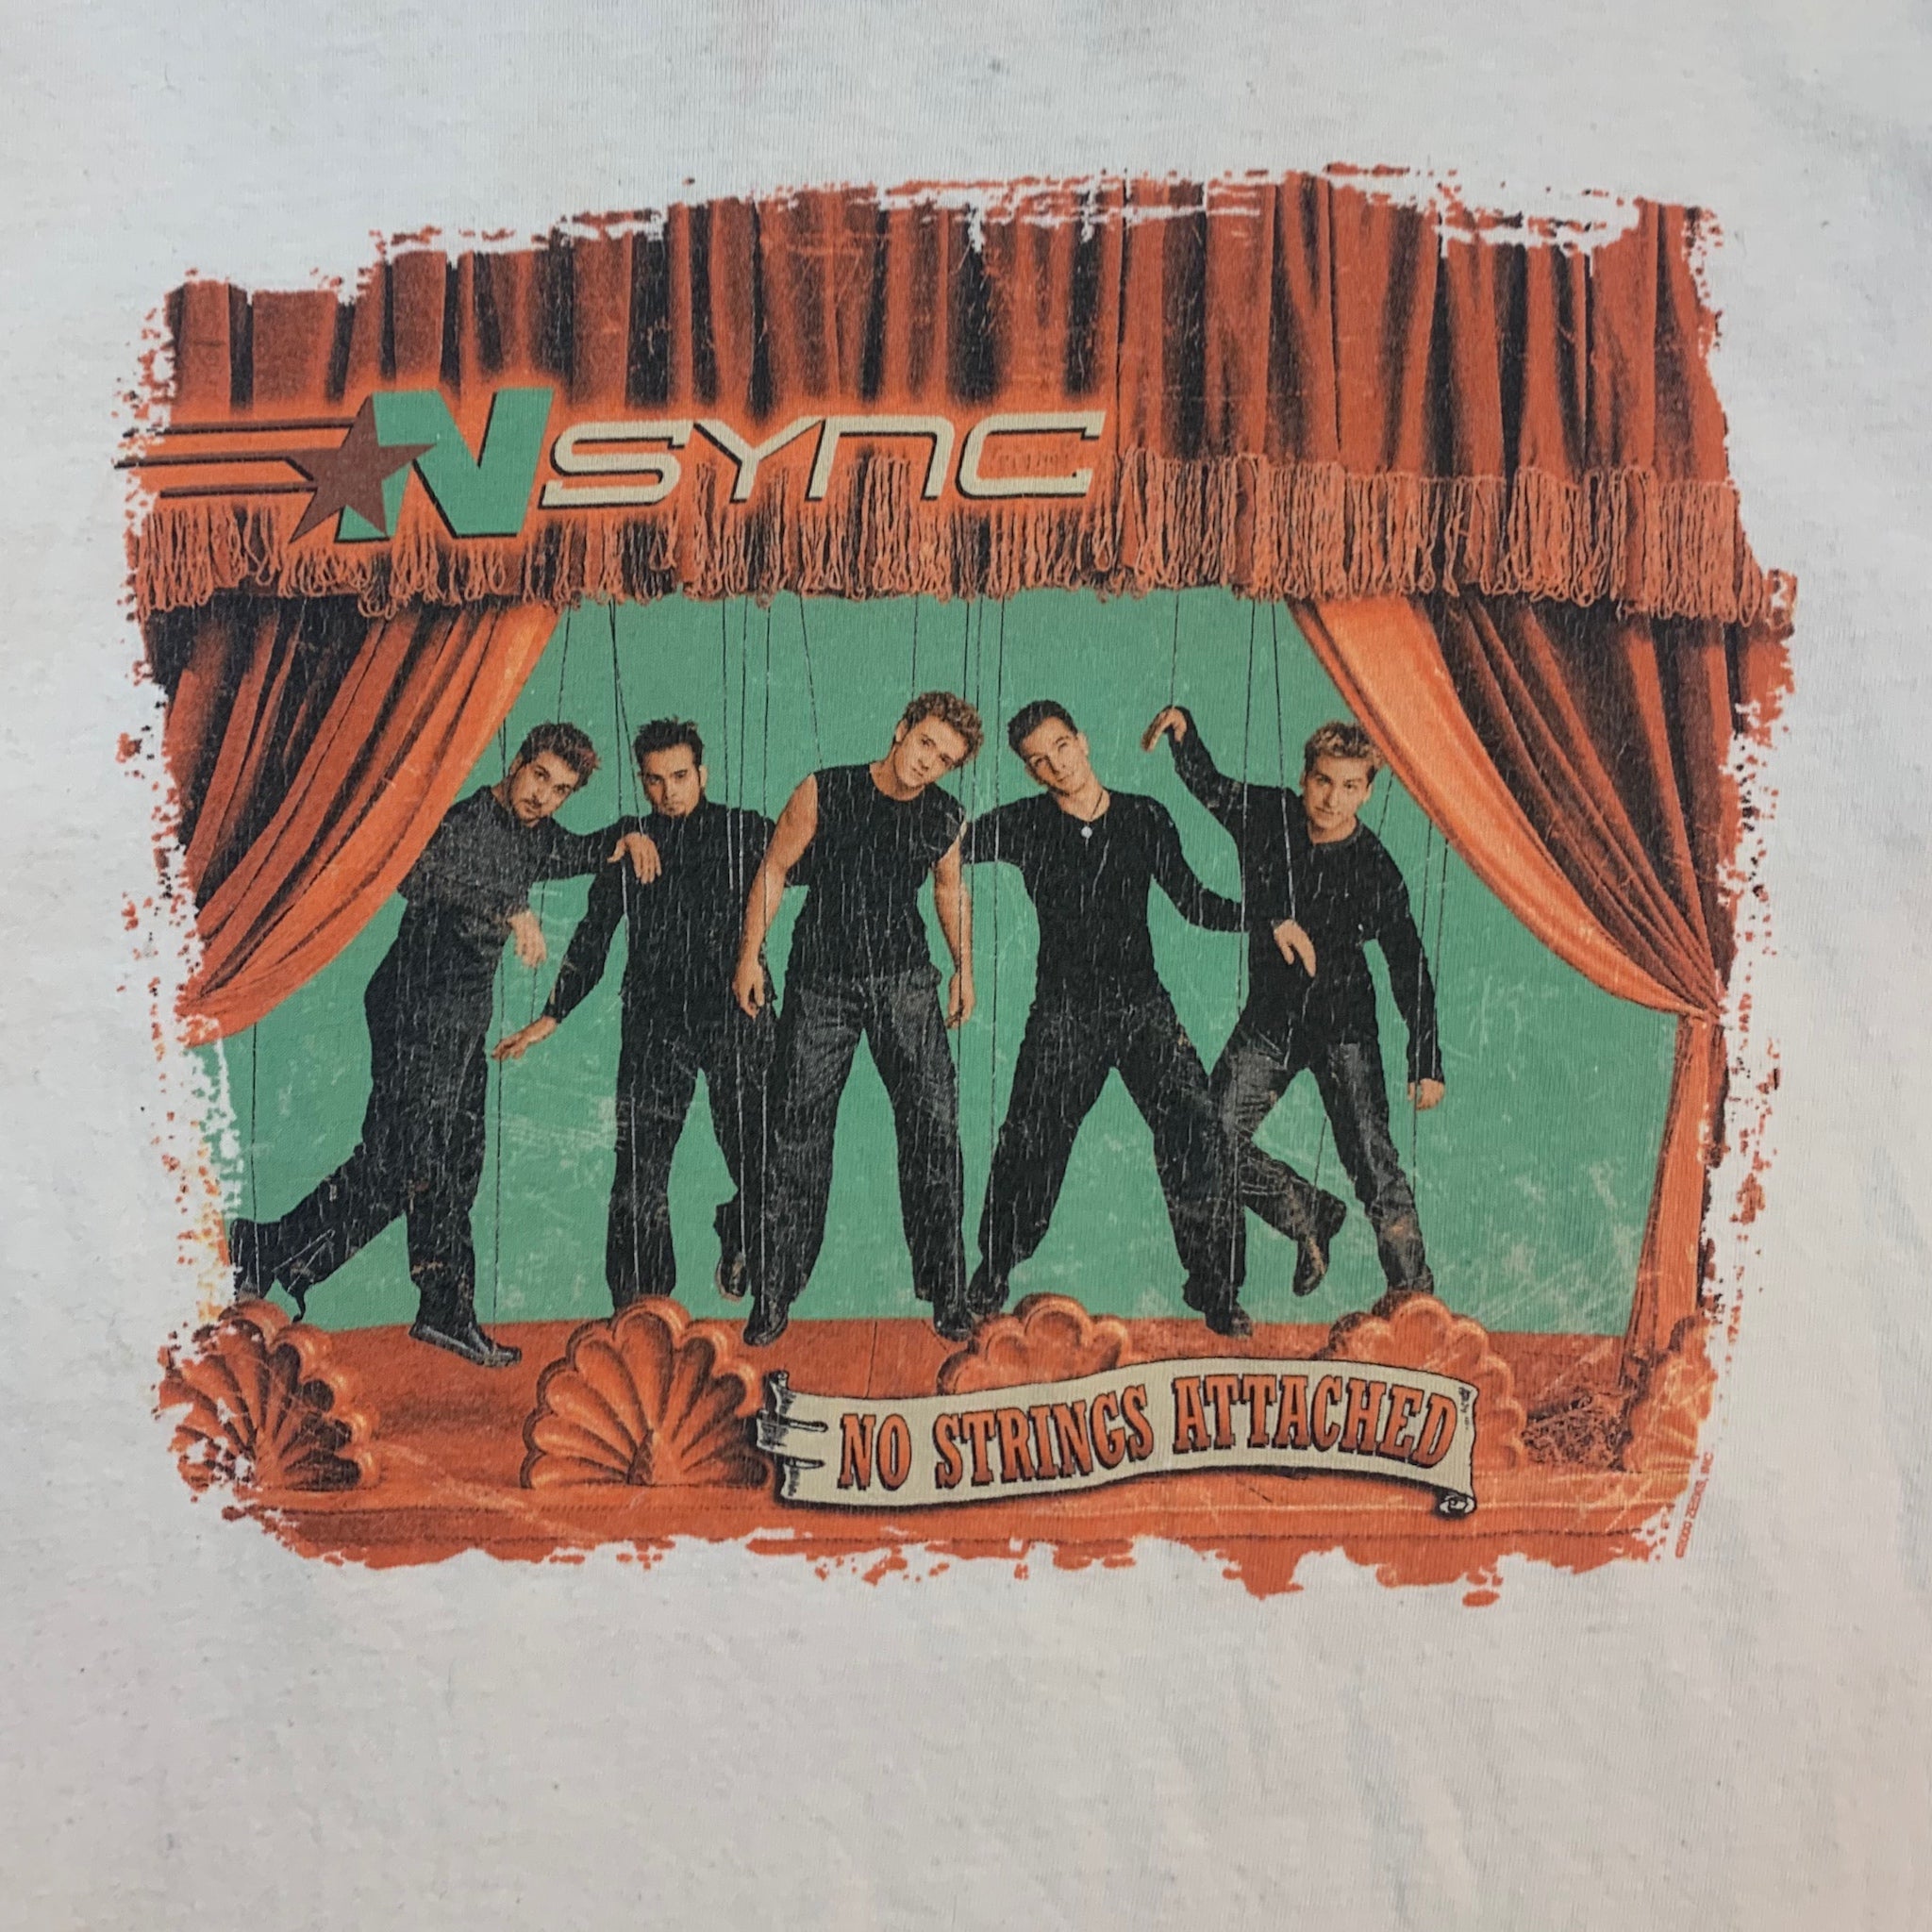 Vintage NSYNC No Strings Attached Tour Tee White